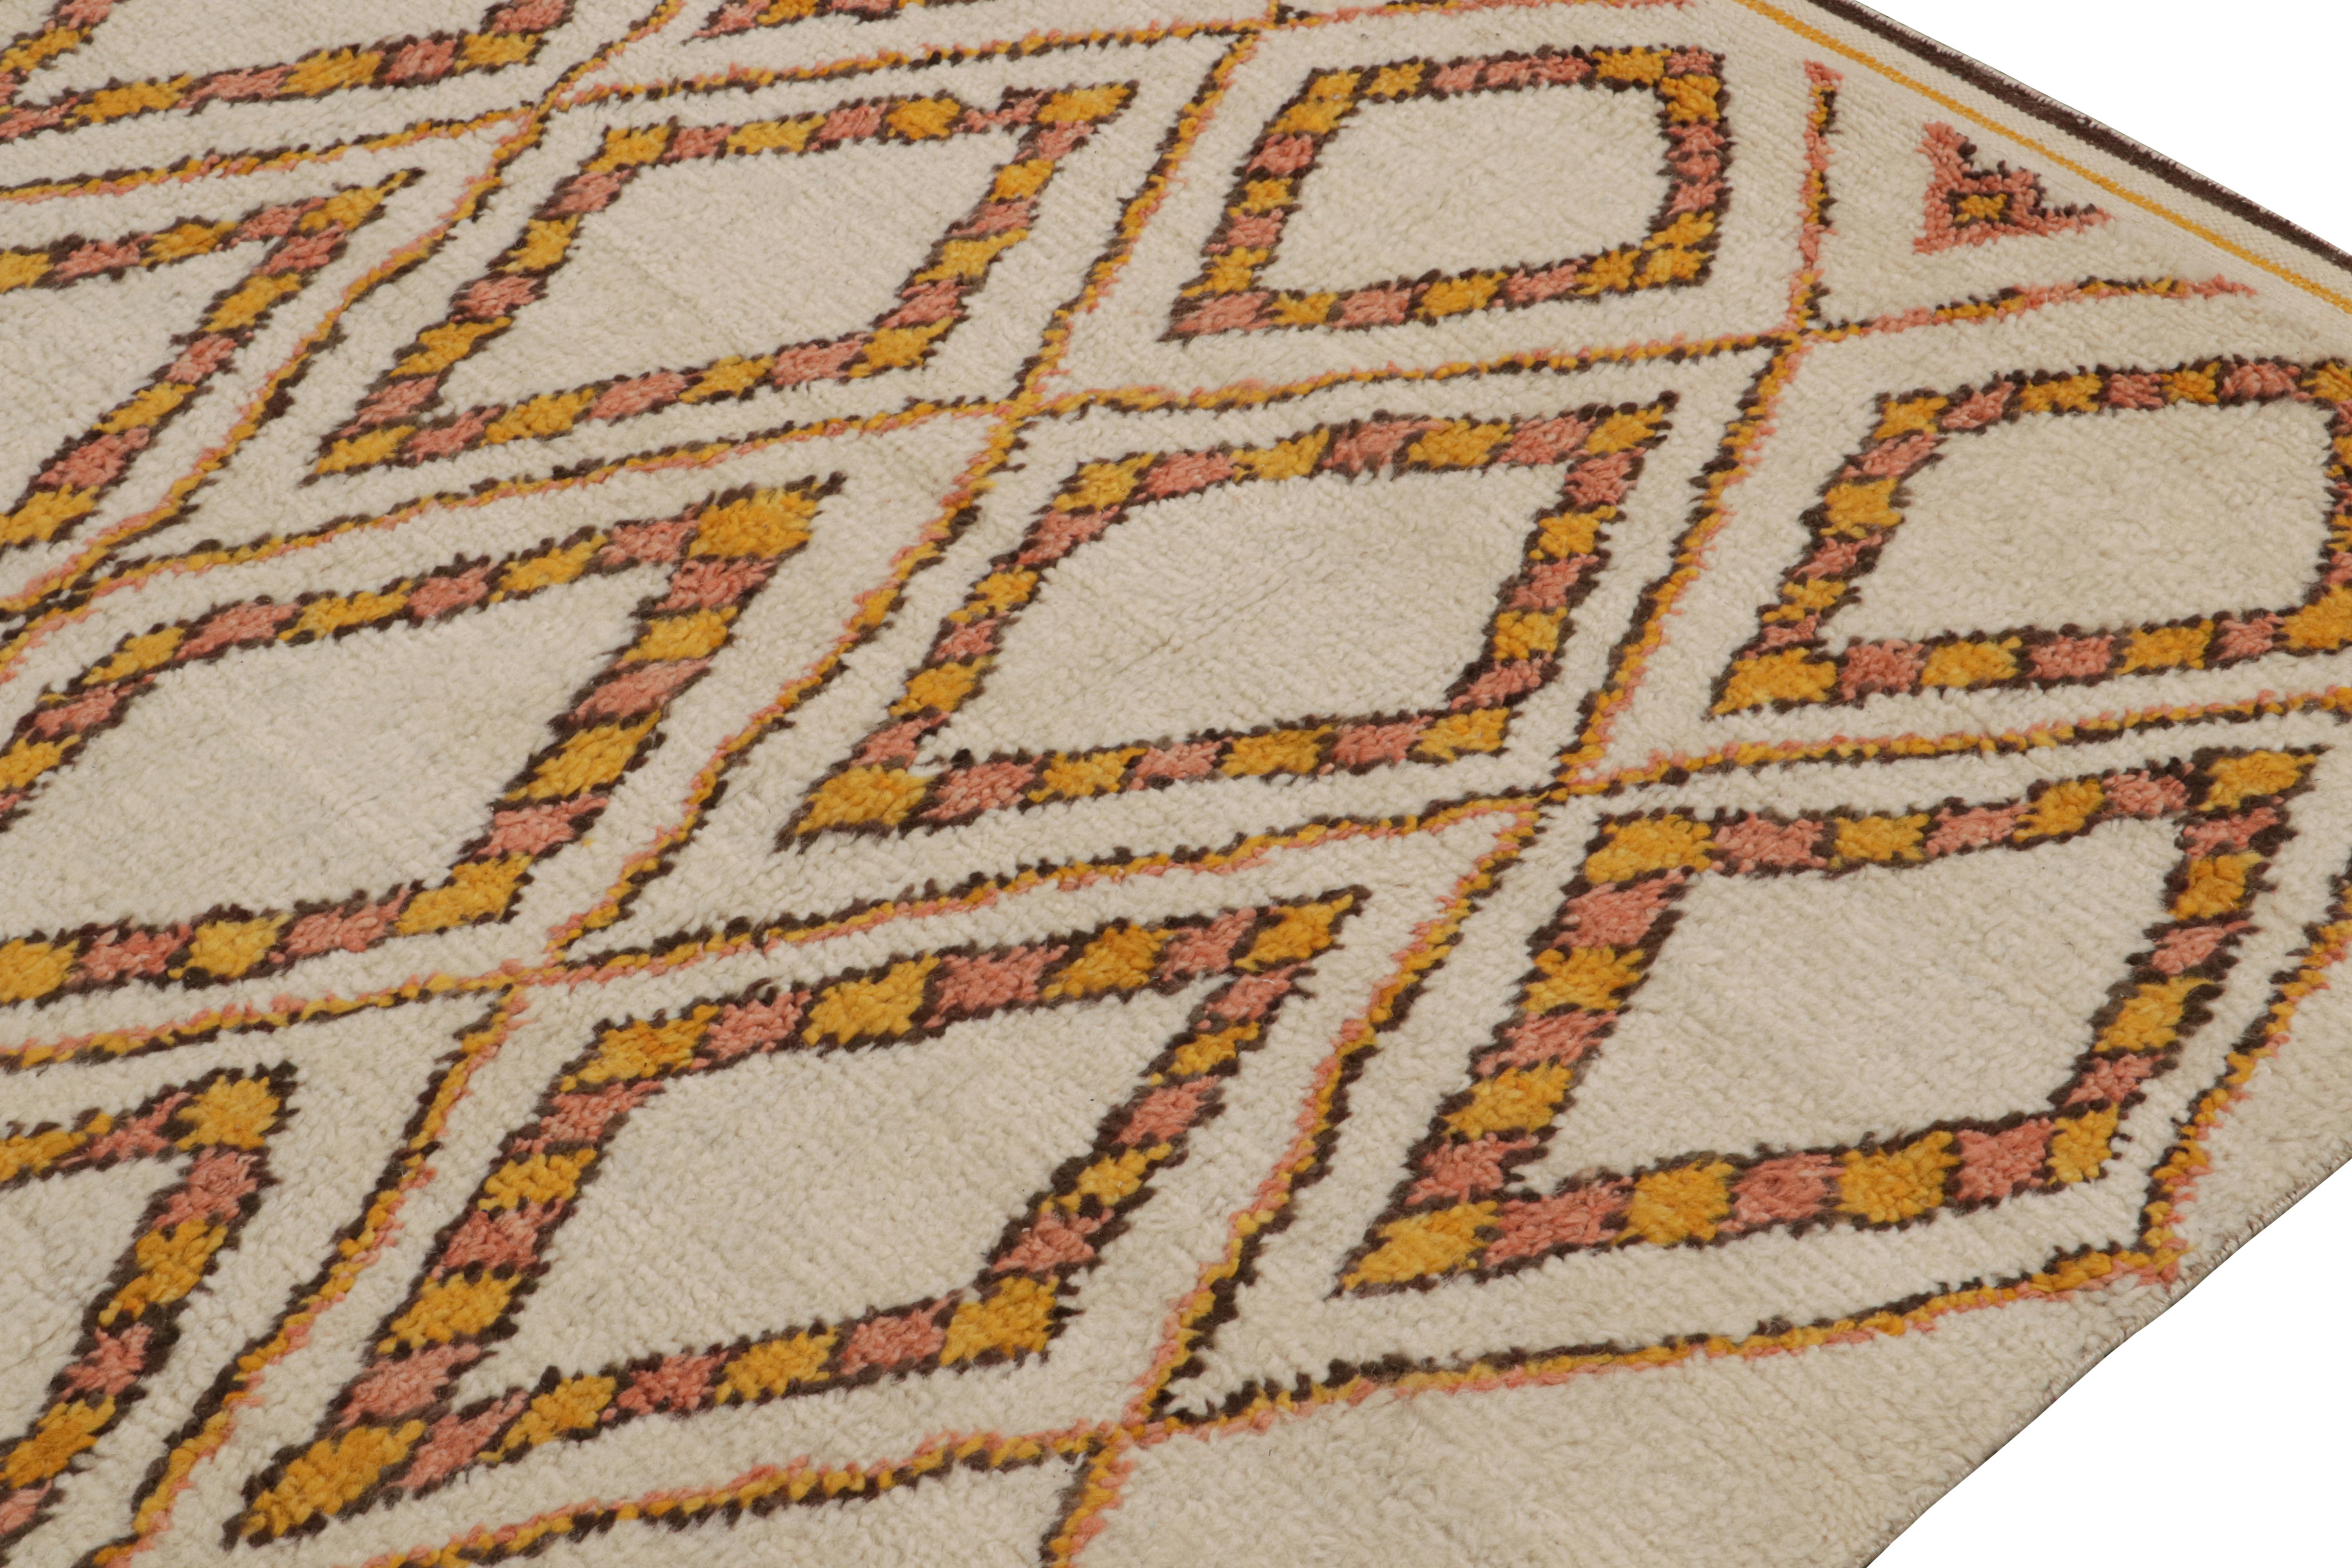 Hand-Knotted Rug & Kilim’s Moroccan Style Rug in Beige-Brown & Orange Geometric Patterns For Sale